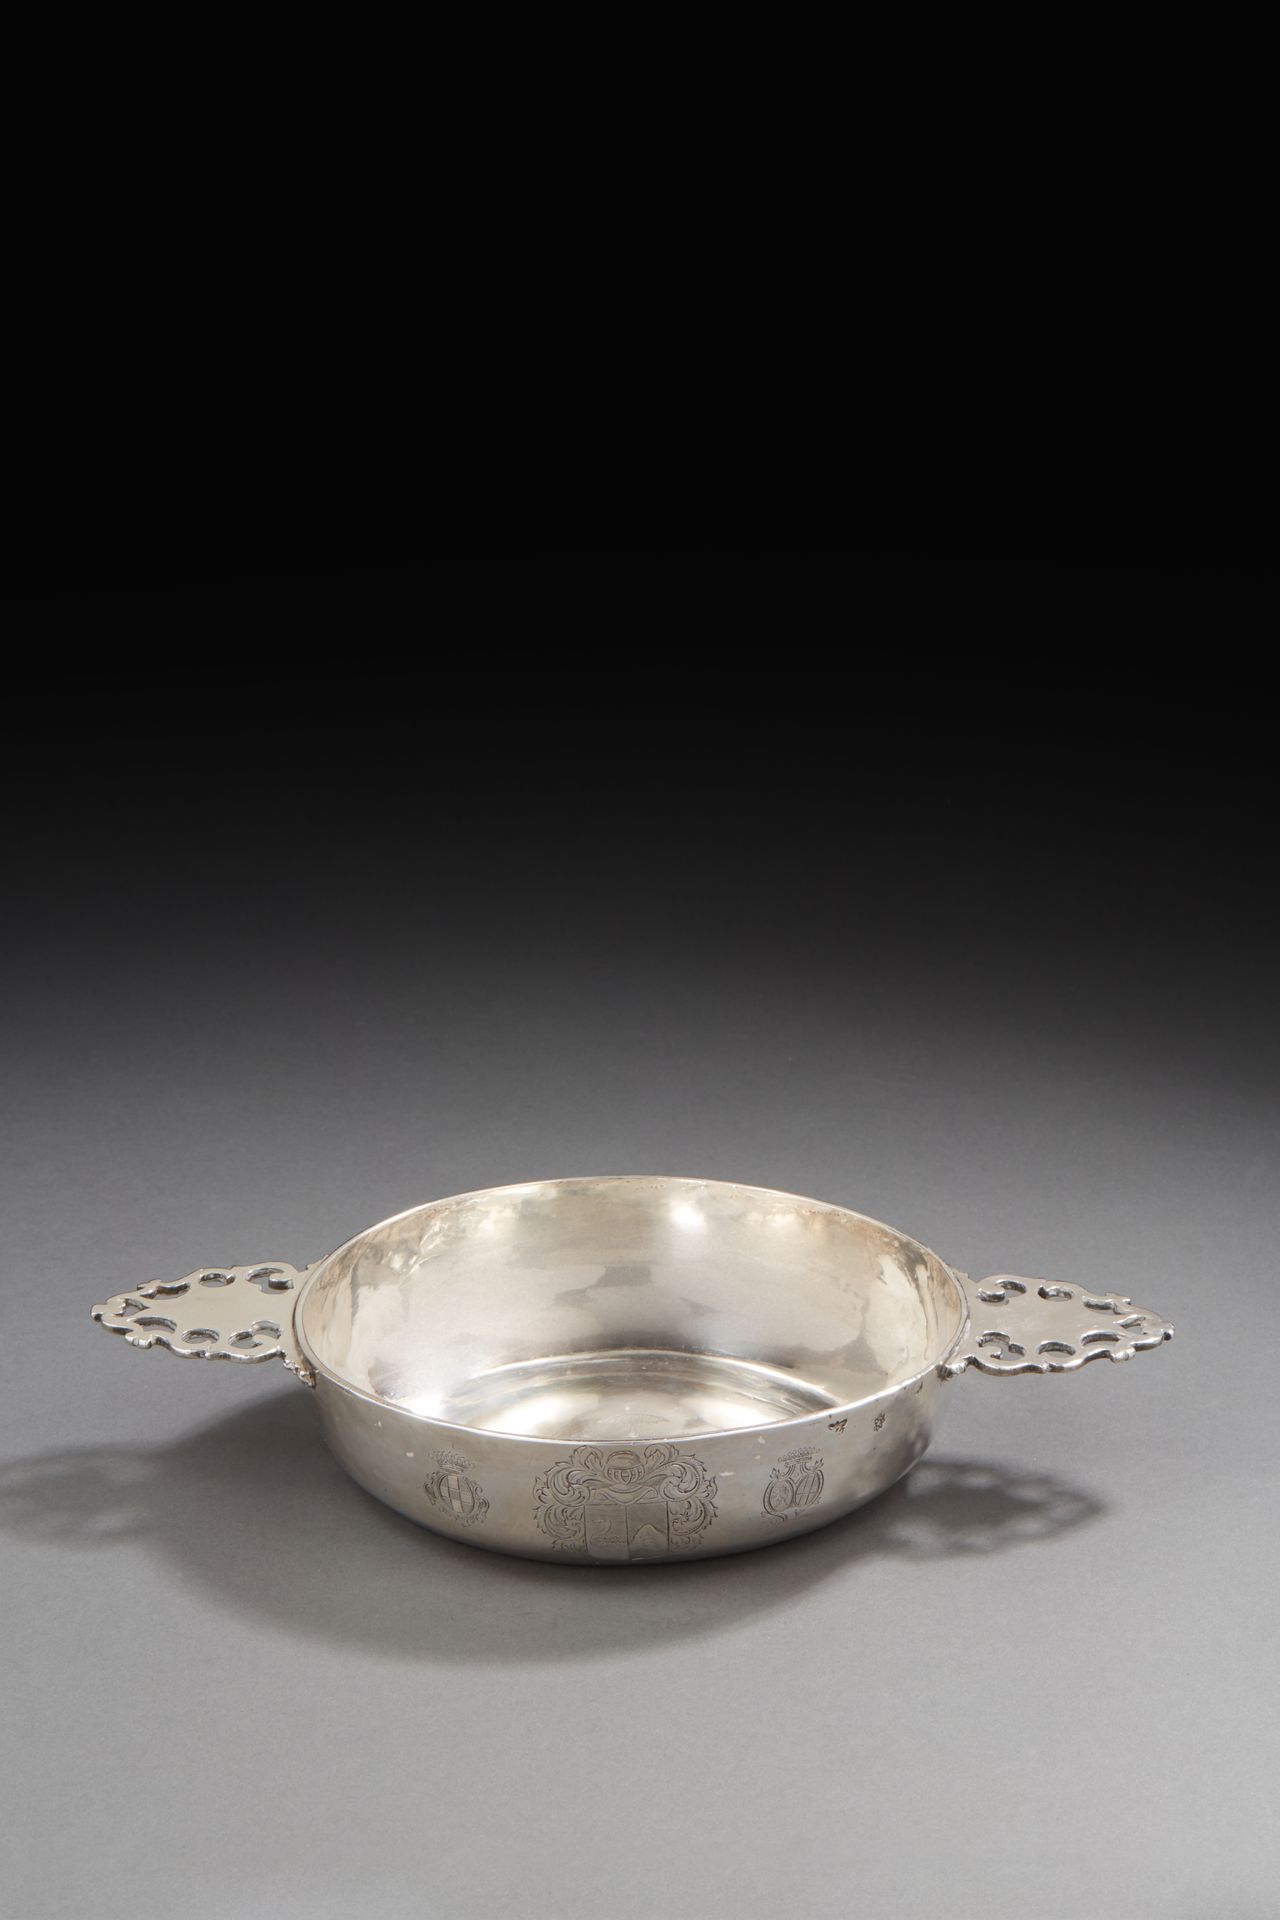 Null PARIS 1682 - 1683
Circular silver ear bowl with two openwork handles, melte&hellip;